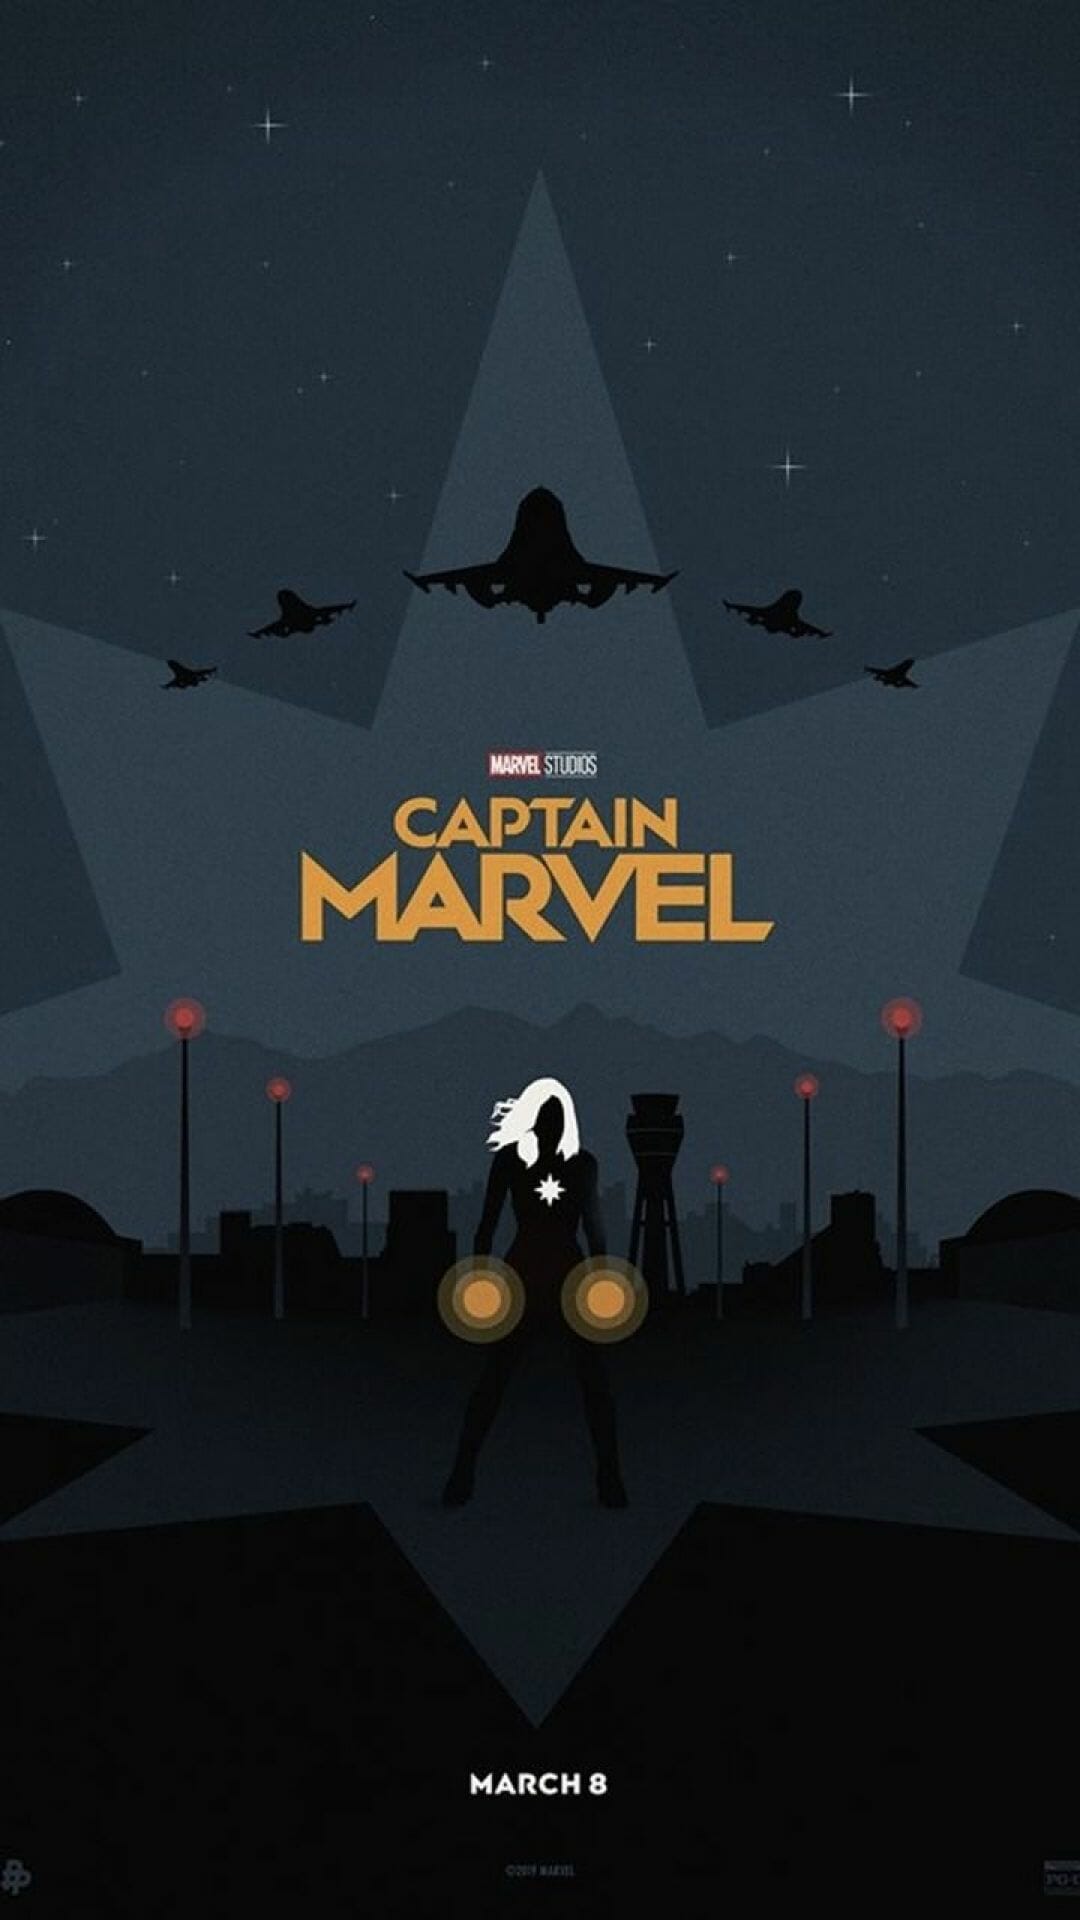 Captain Marvel iPhone Wallpaper with high-resolution 1080x1920 pixel. You can use this wallpaper for your iPhone 5, 6, 7, 8, X, XS, XR backgrounds, Mobile Screensaver, or iPad Lock Screen - Marvel